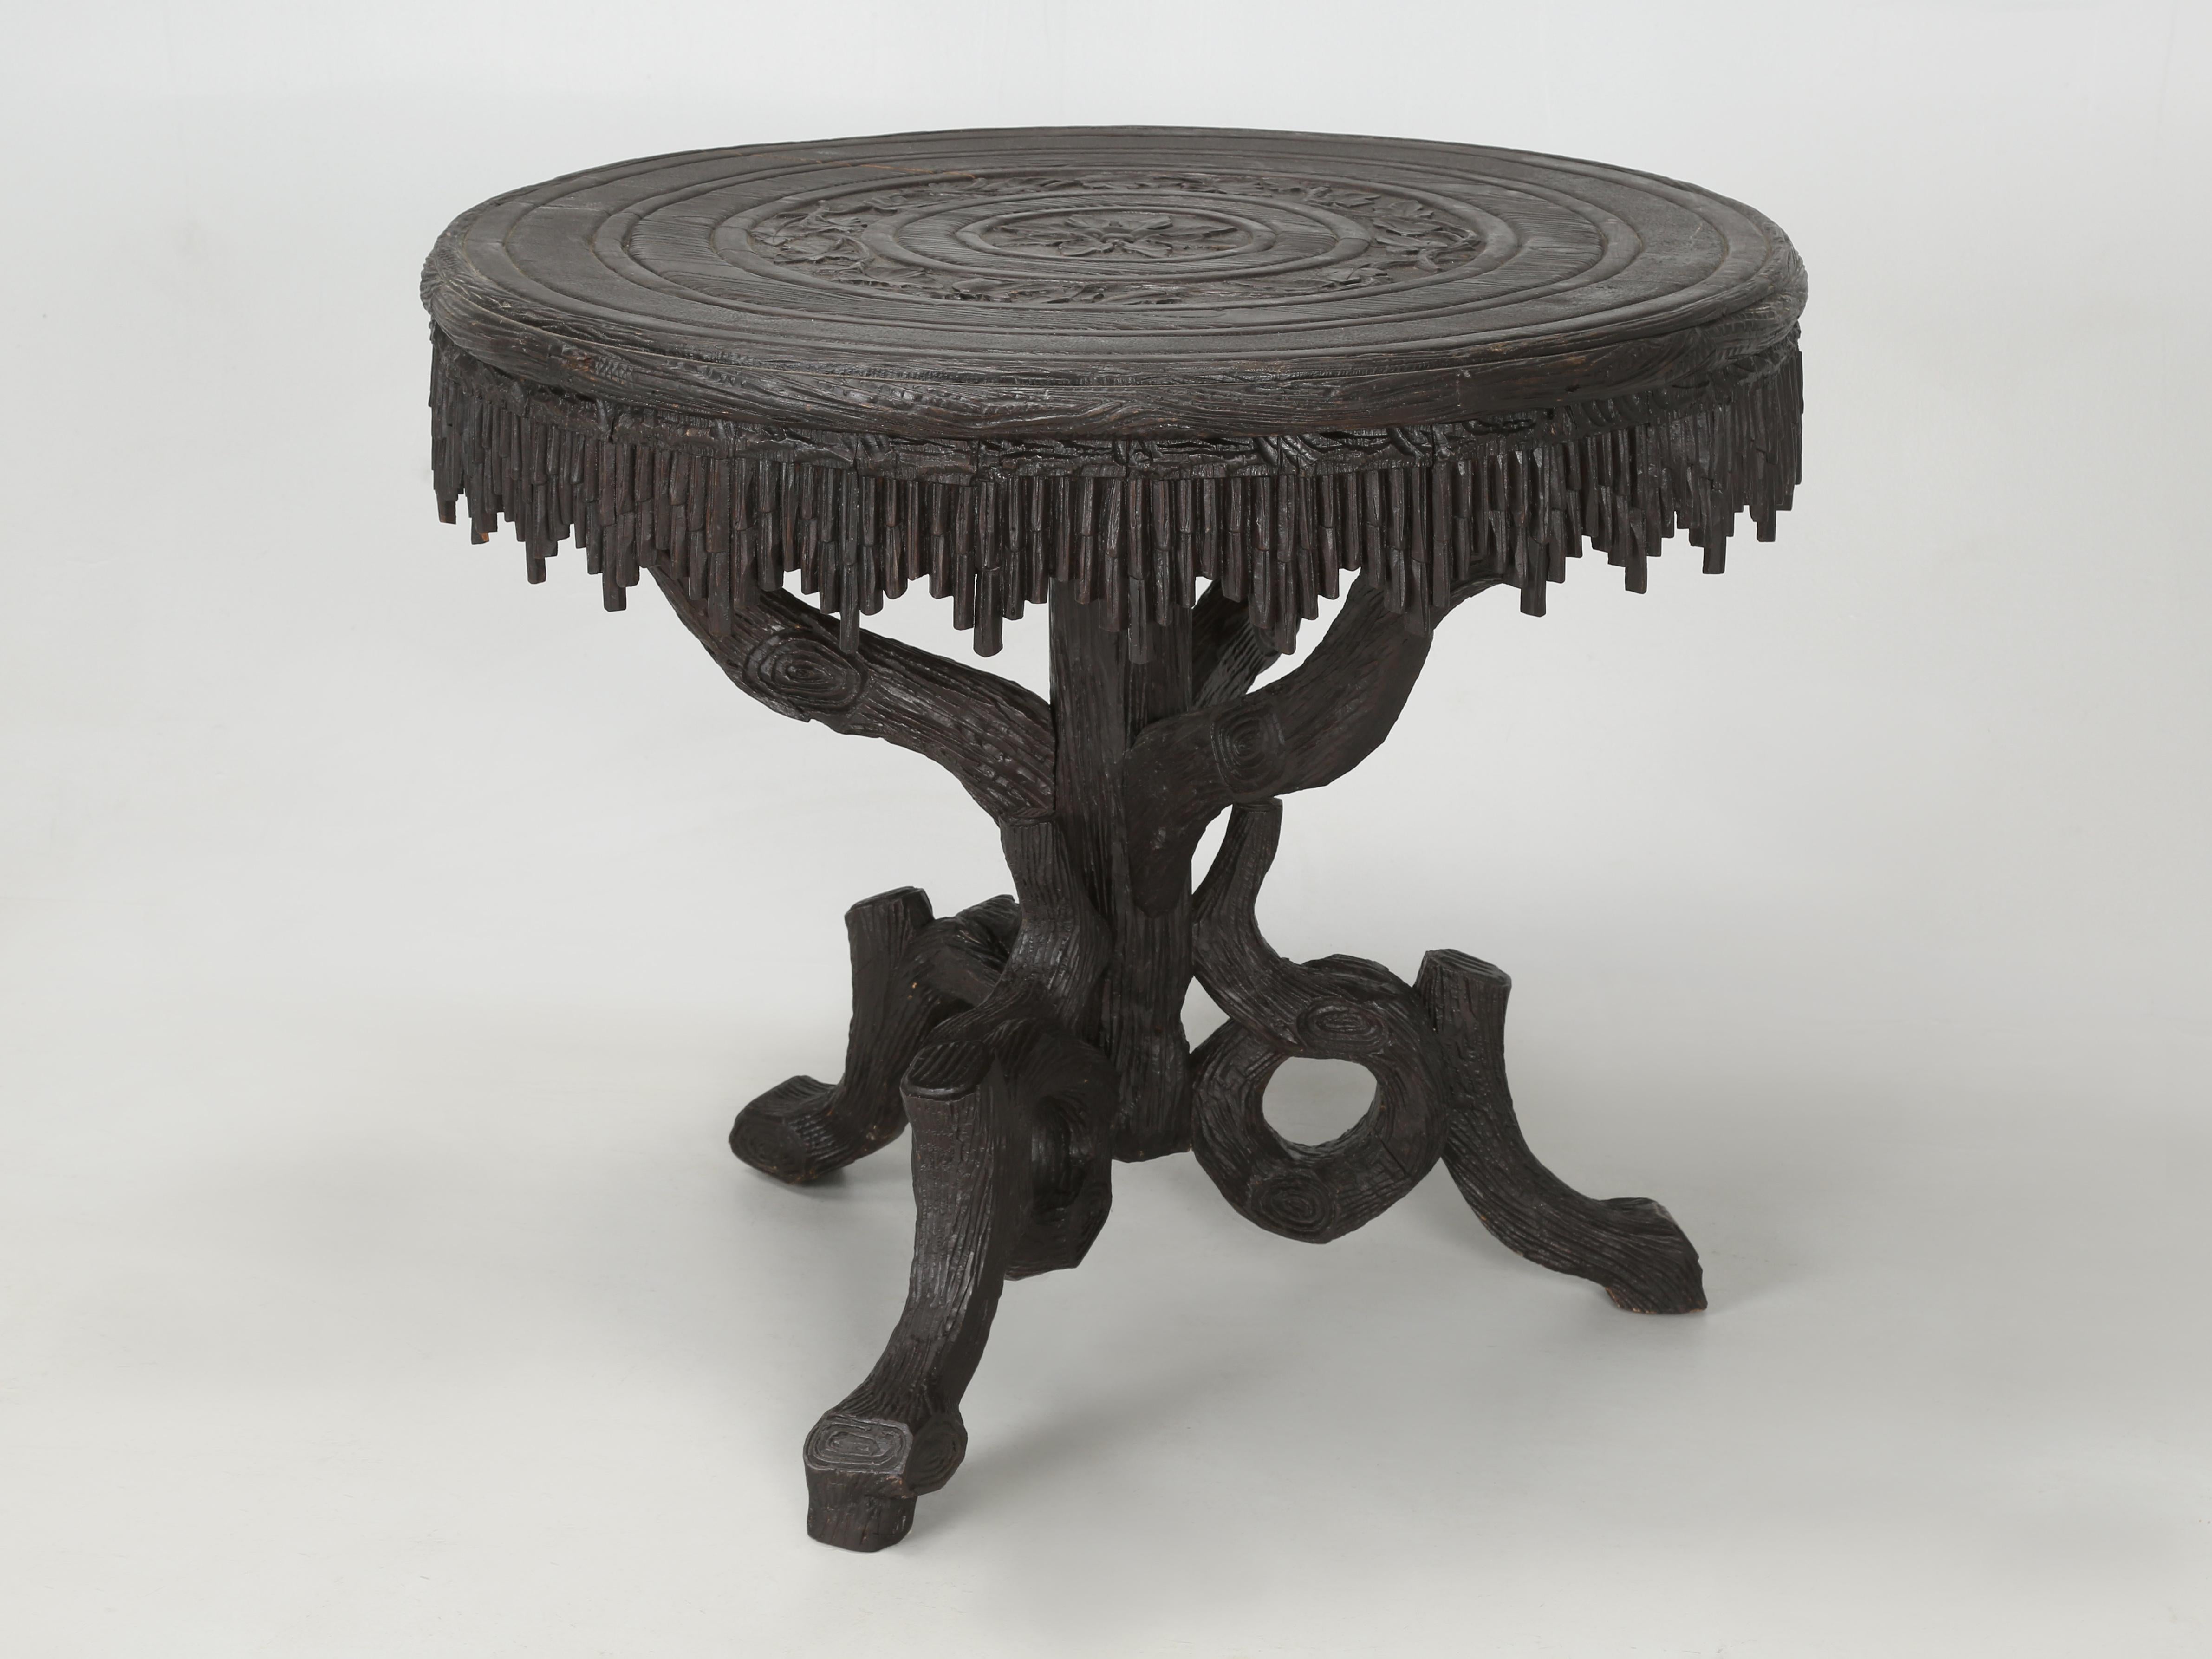 Another selection from our vast collection of Black Forest Furniture, is a beautiful small Dining Table or game table with a set of matching Black Forest Chairs. Black Forest Furniture is both, a bit rustic blended with a good dose of whimsy. Our